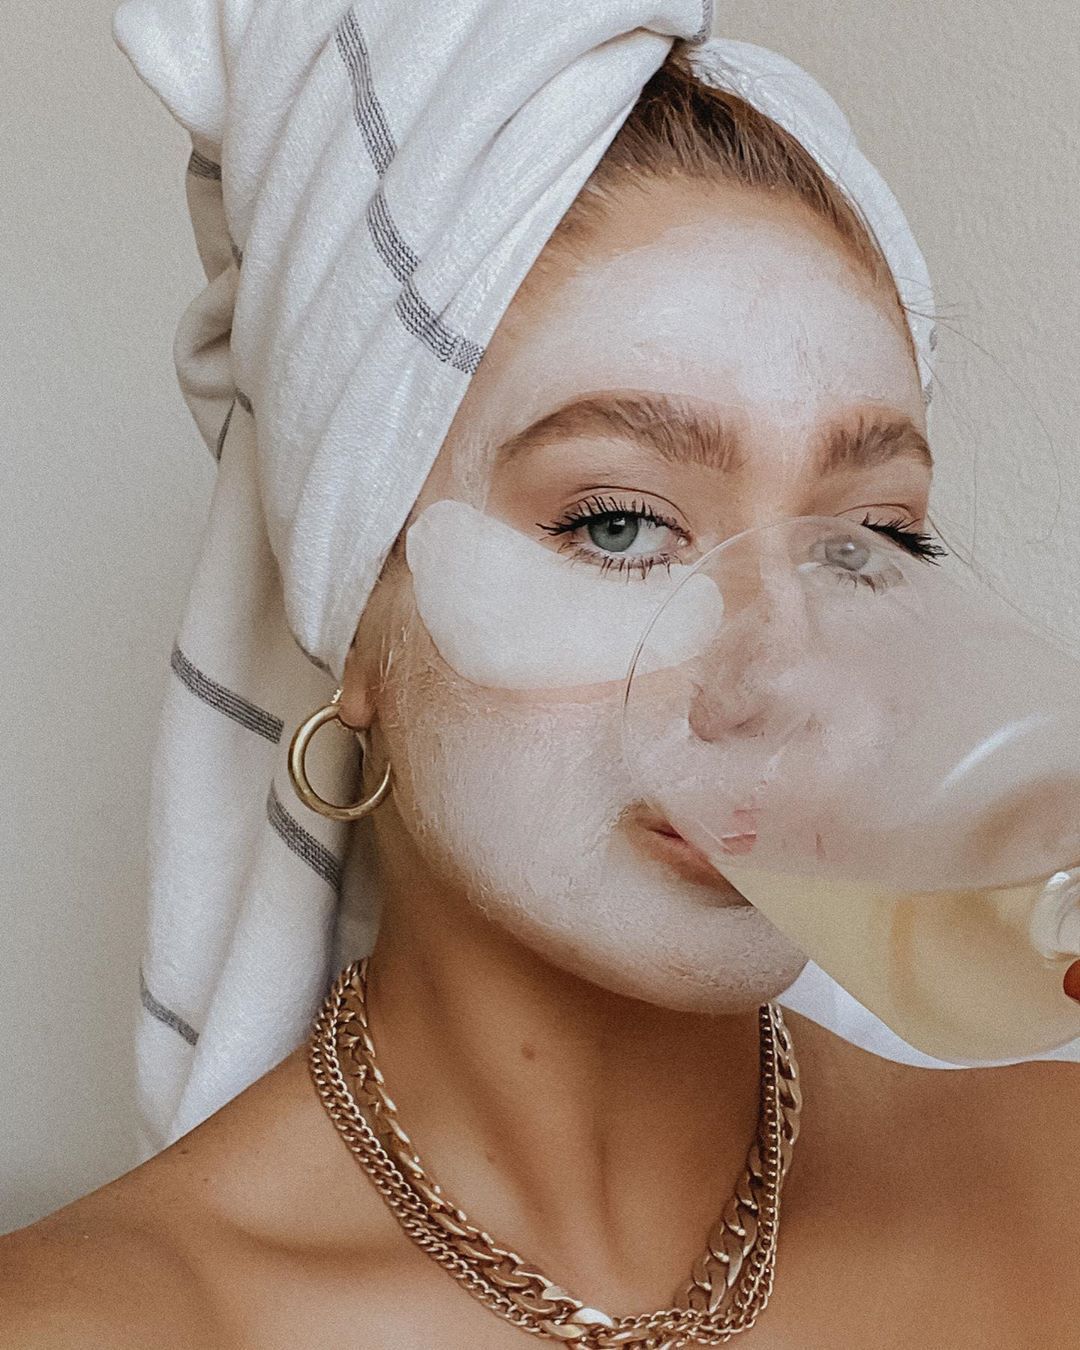 Allison Kelley's Instagram photo: “I heard LA is going to start requiring face masks, so I'm just getting a head start ?????” - Allison Kelley's Instagram photo: “I heard LA is going to start requiring face masks, so I'm just getting a head start ?????” -   16 beauty Mask photography ideas